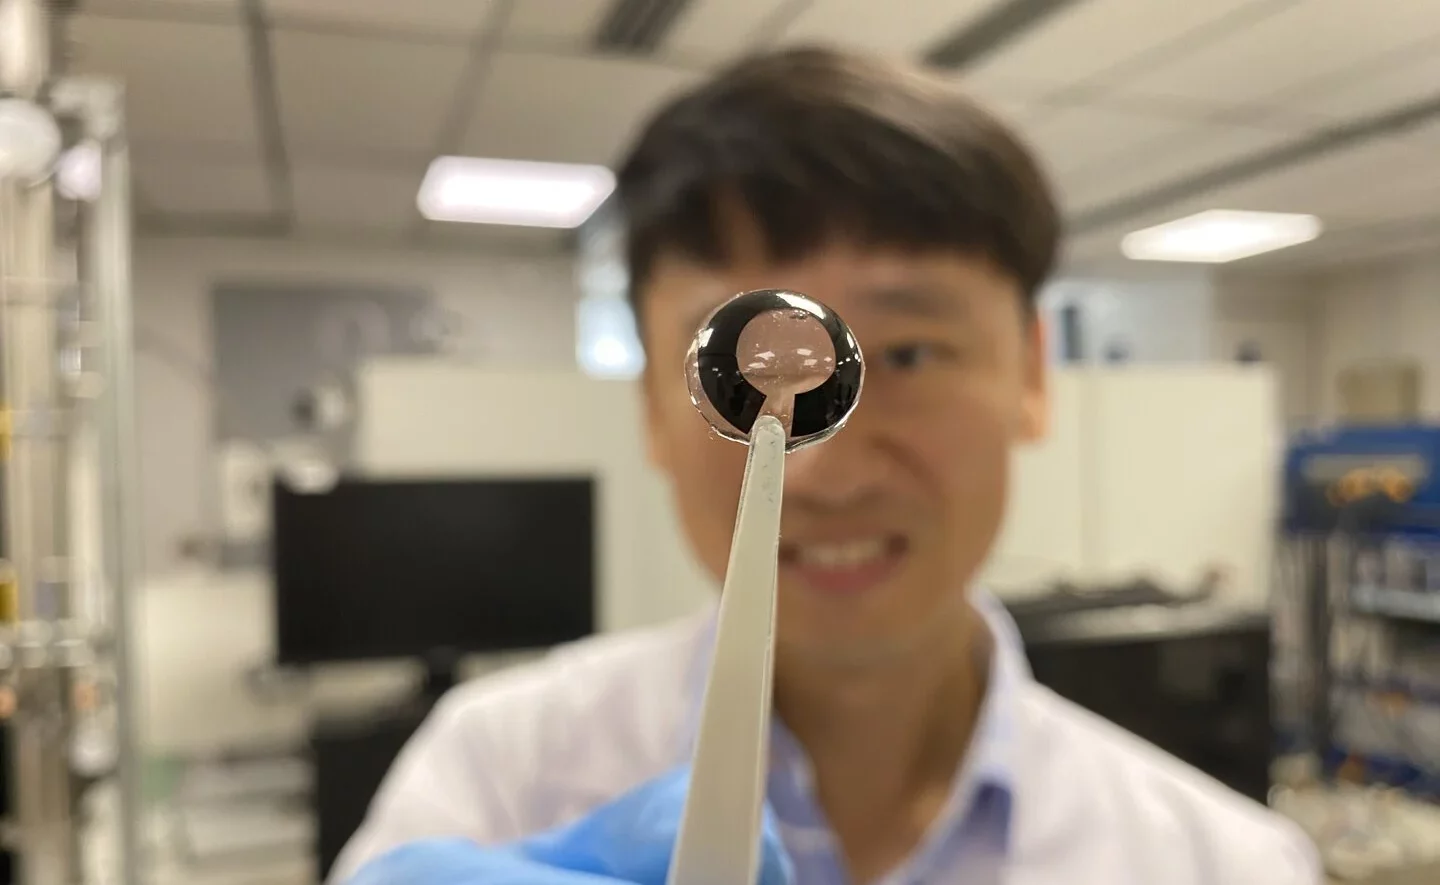 Scientists Working On Smart Contacts Powered By Human Tears